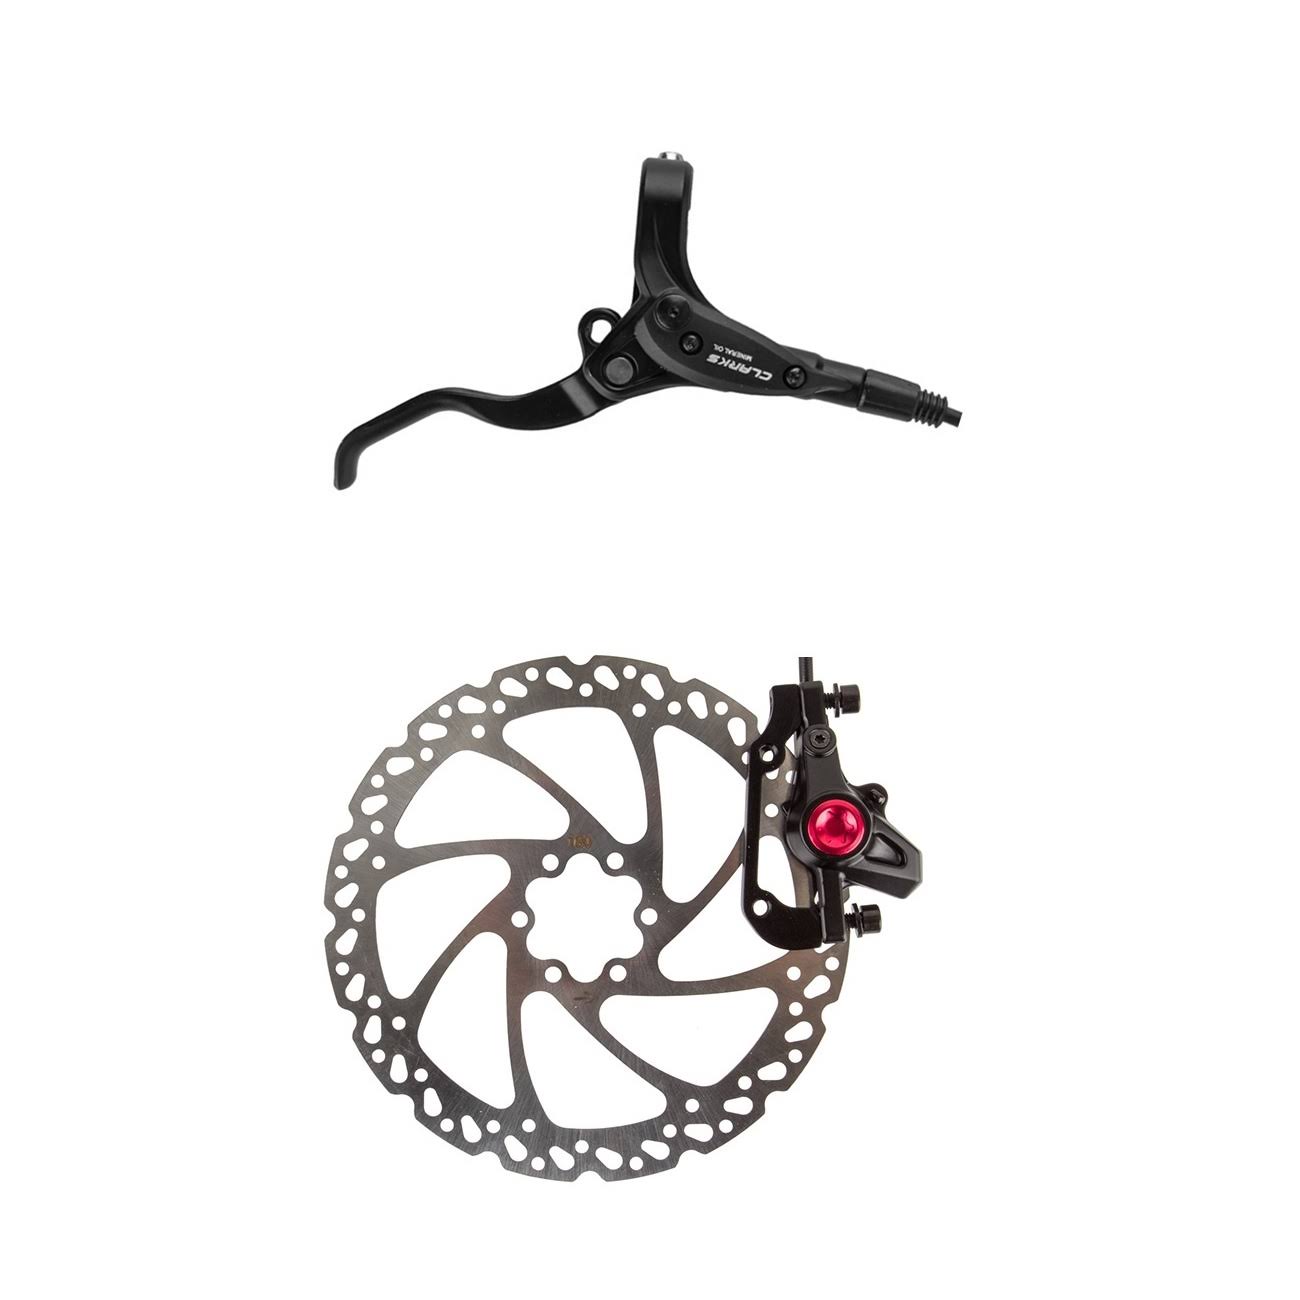 Clarks Bicycle Components and Parts M2 Hydraulic Disc Brake Front Disc Brake - Black